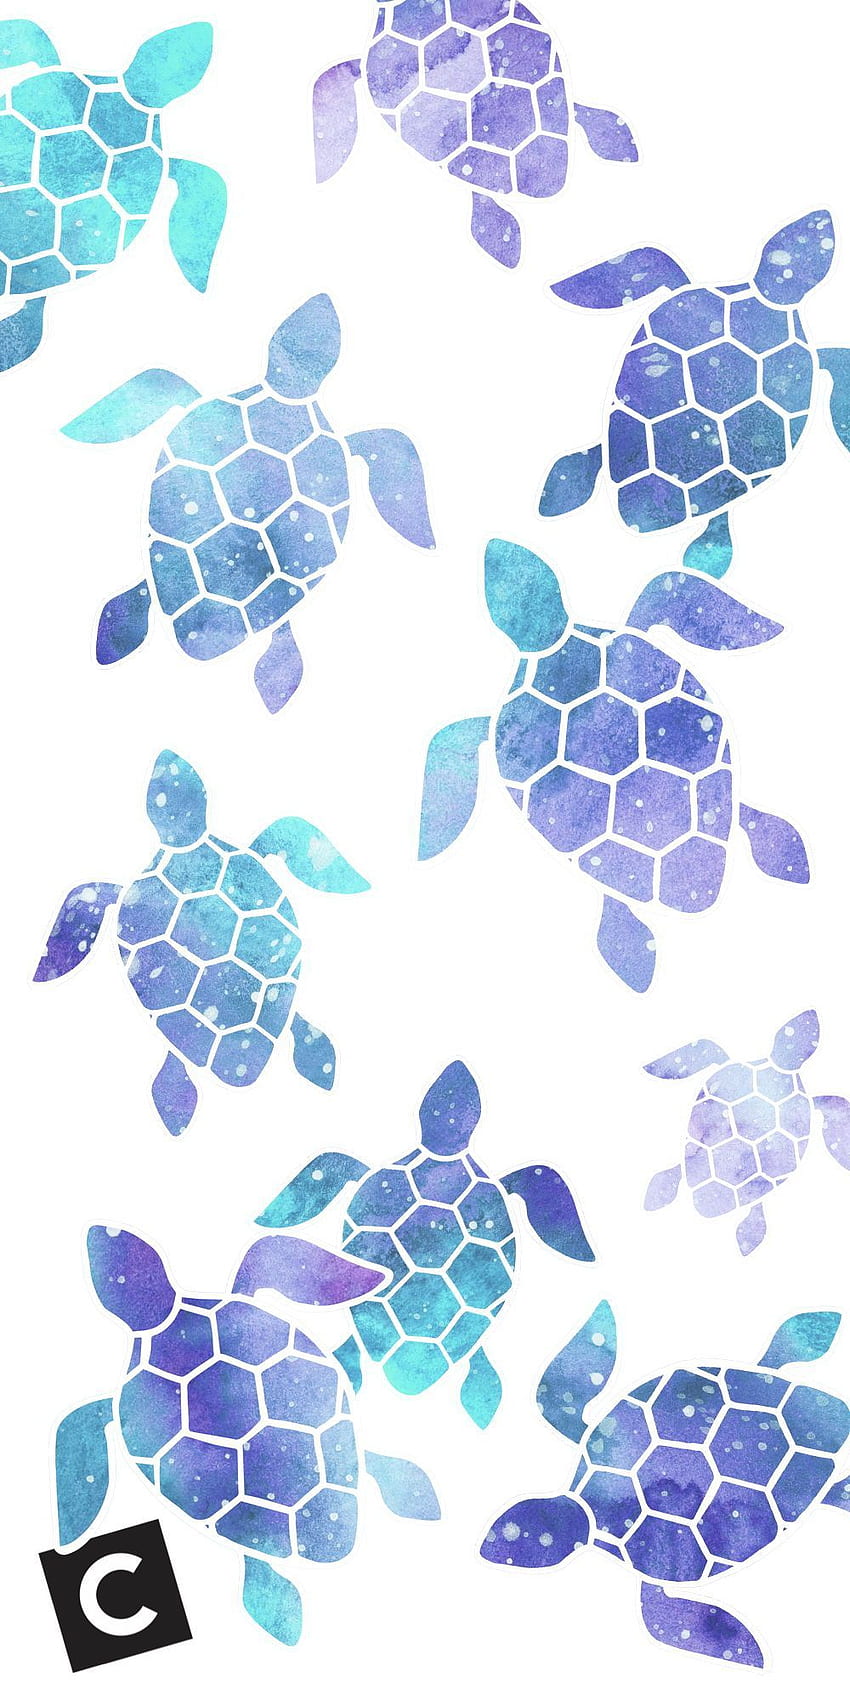 Turtle art Images  Search Images on Everypixel